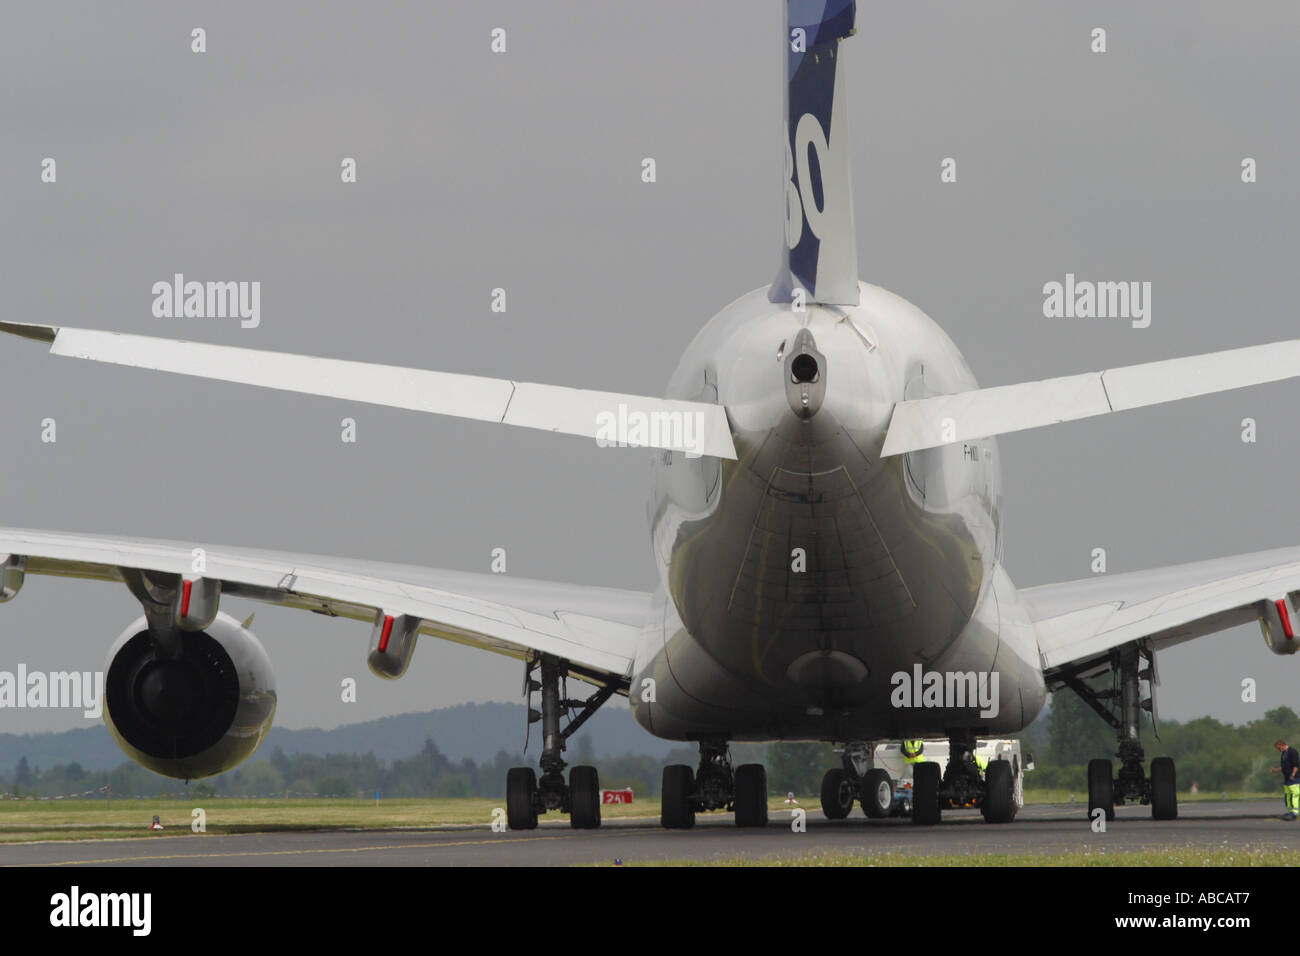 Airbus A380 Airbus new huge massive jet aircraft airliner rear view Stock Photo